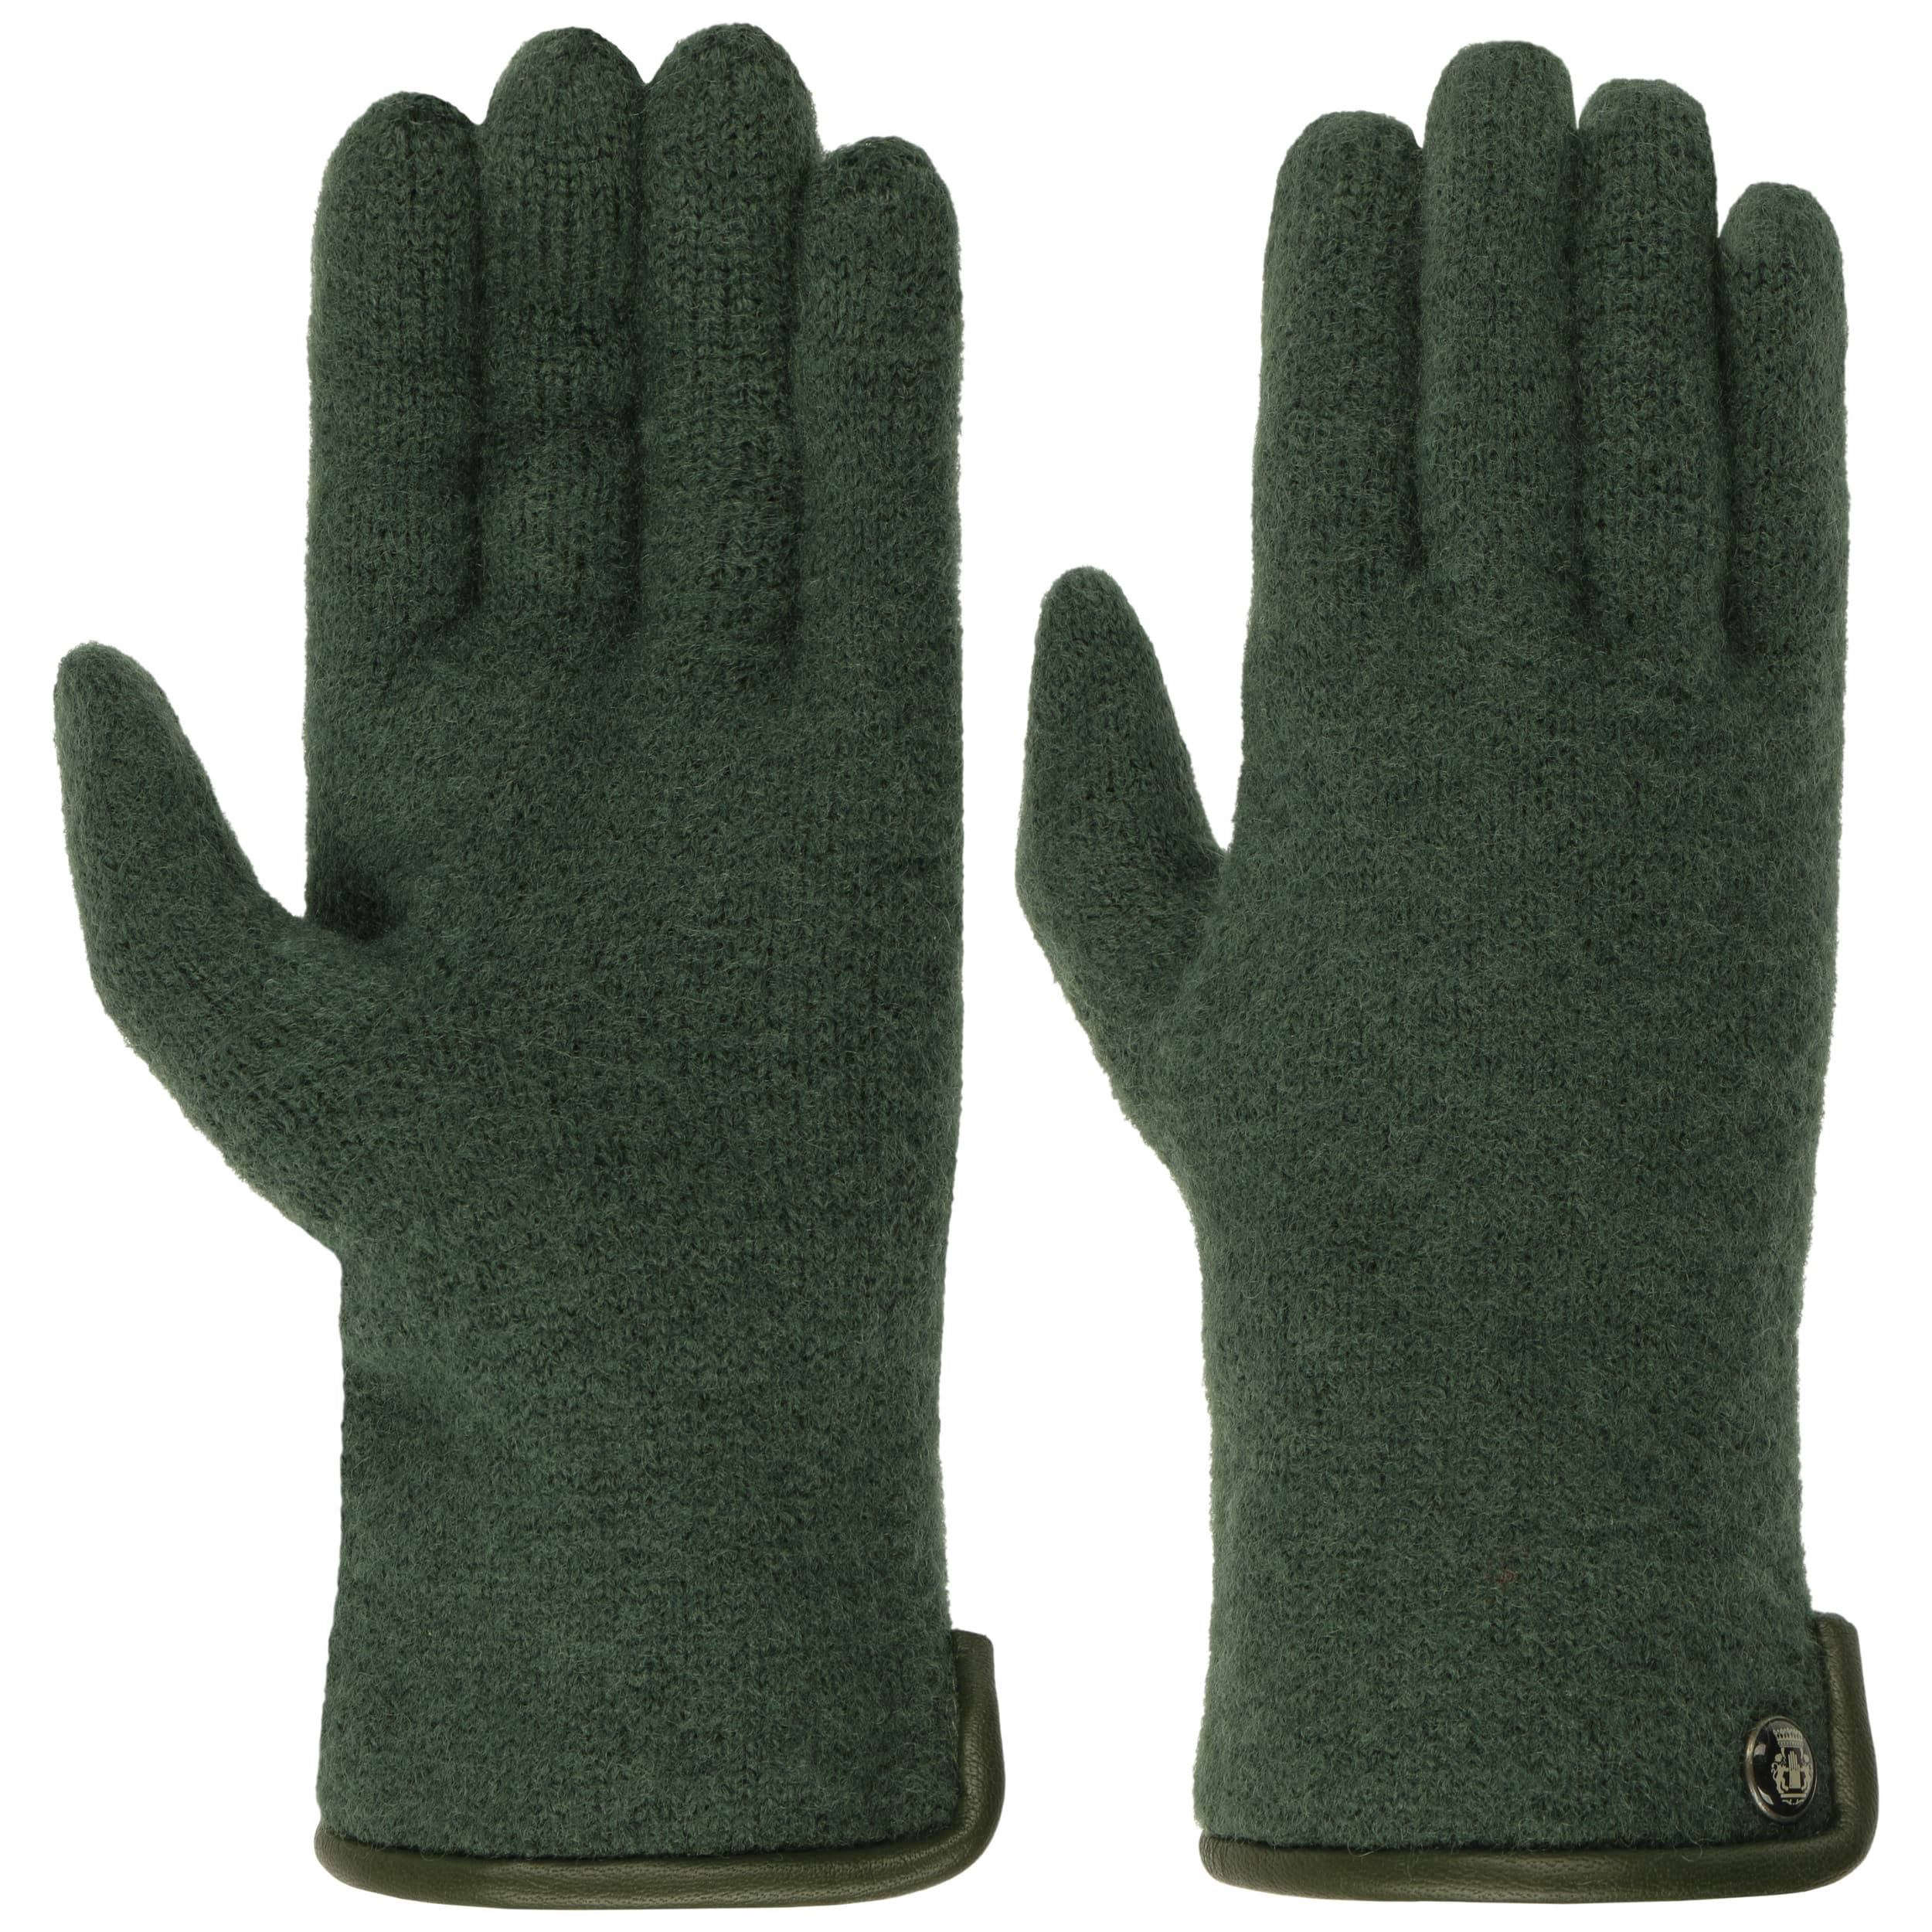 Milled Wool Gloves With Leather by Roeckl - Dark Green - Damen - Size: 6 1/2 HS